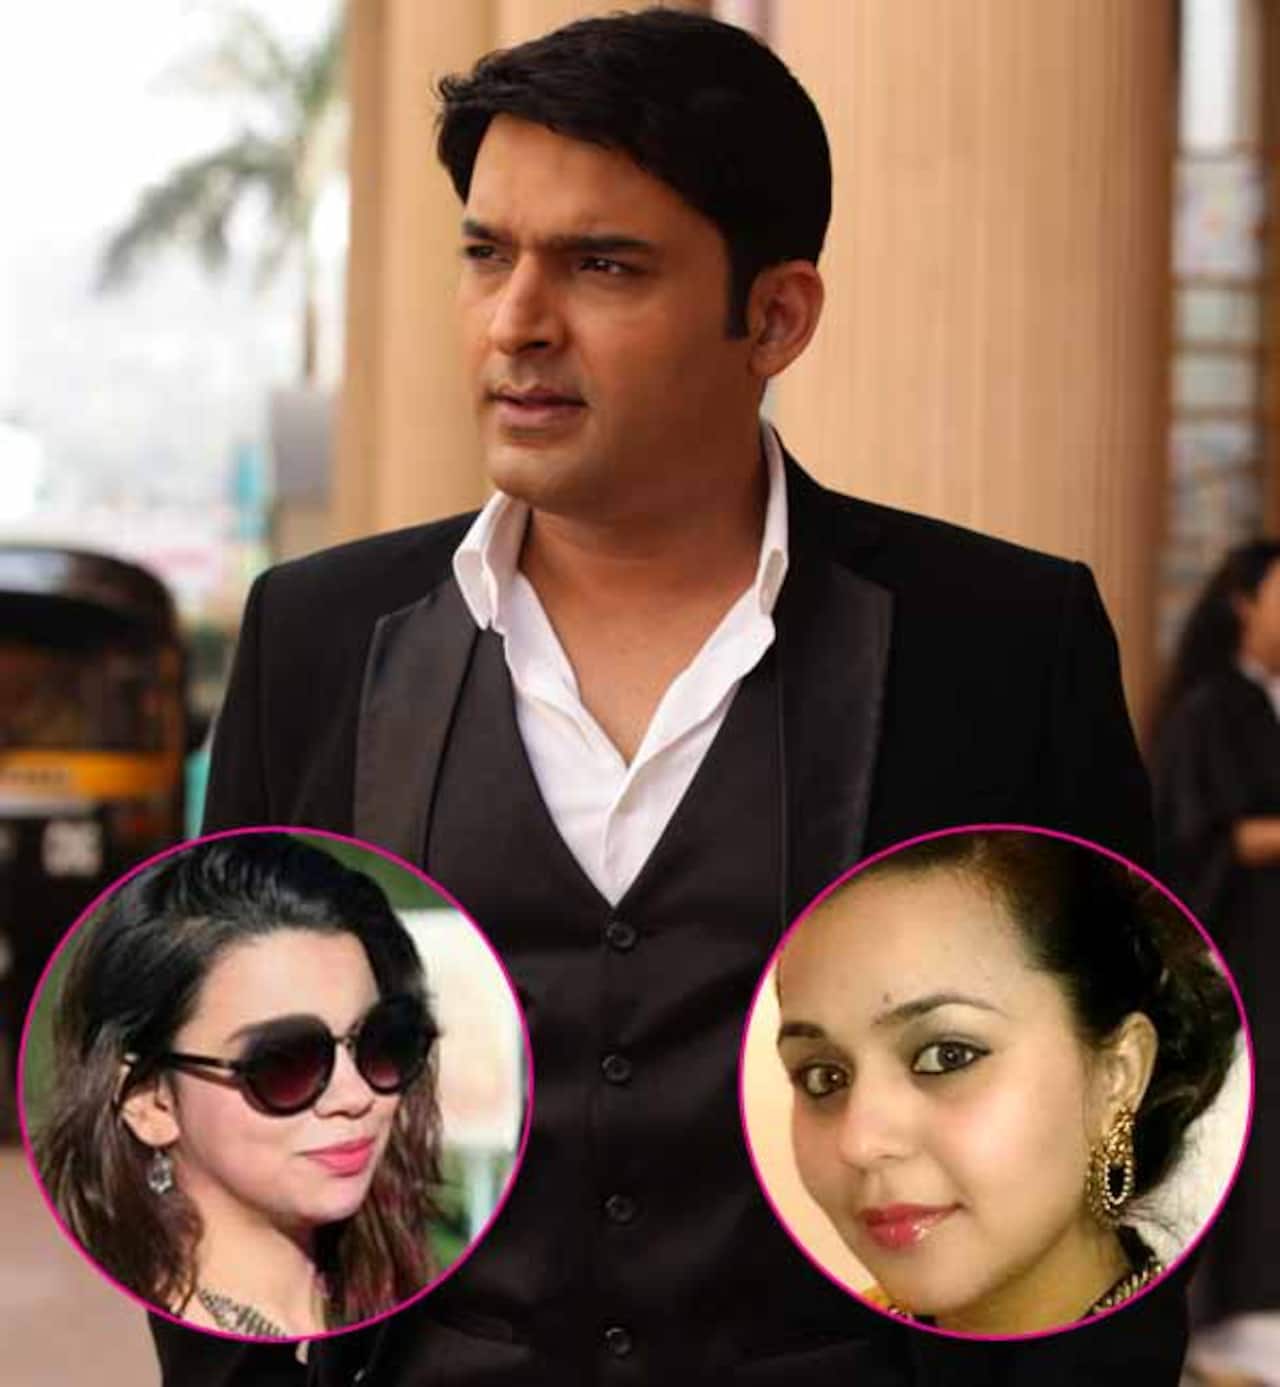 All you need to know about Kapil Sharma's love affairs!